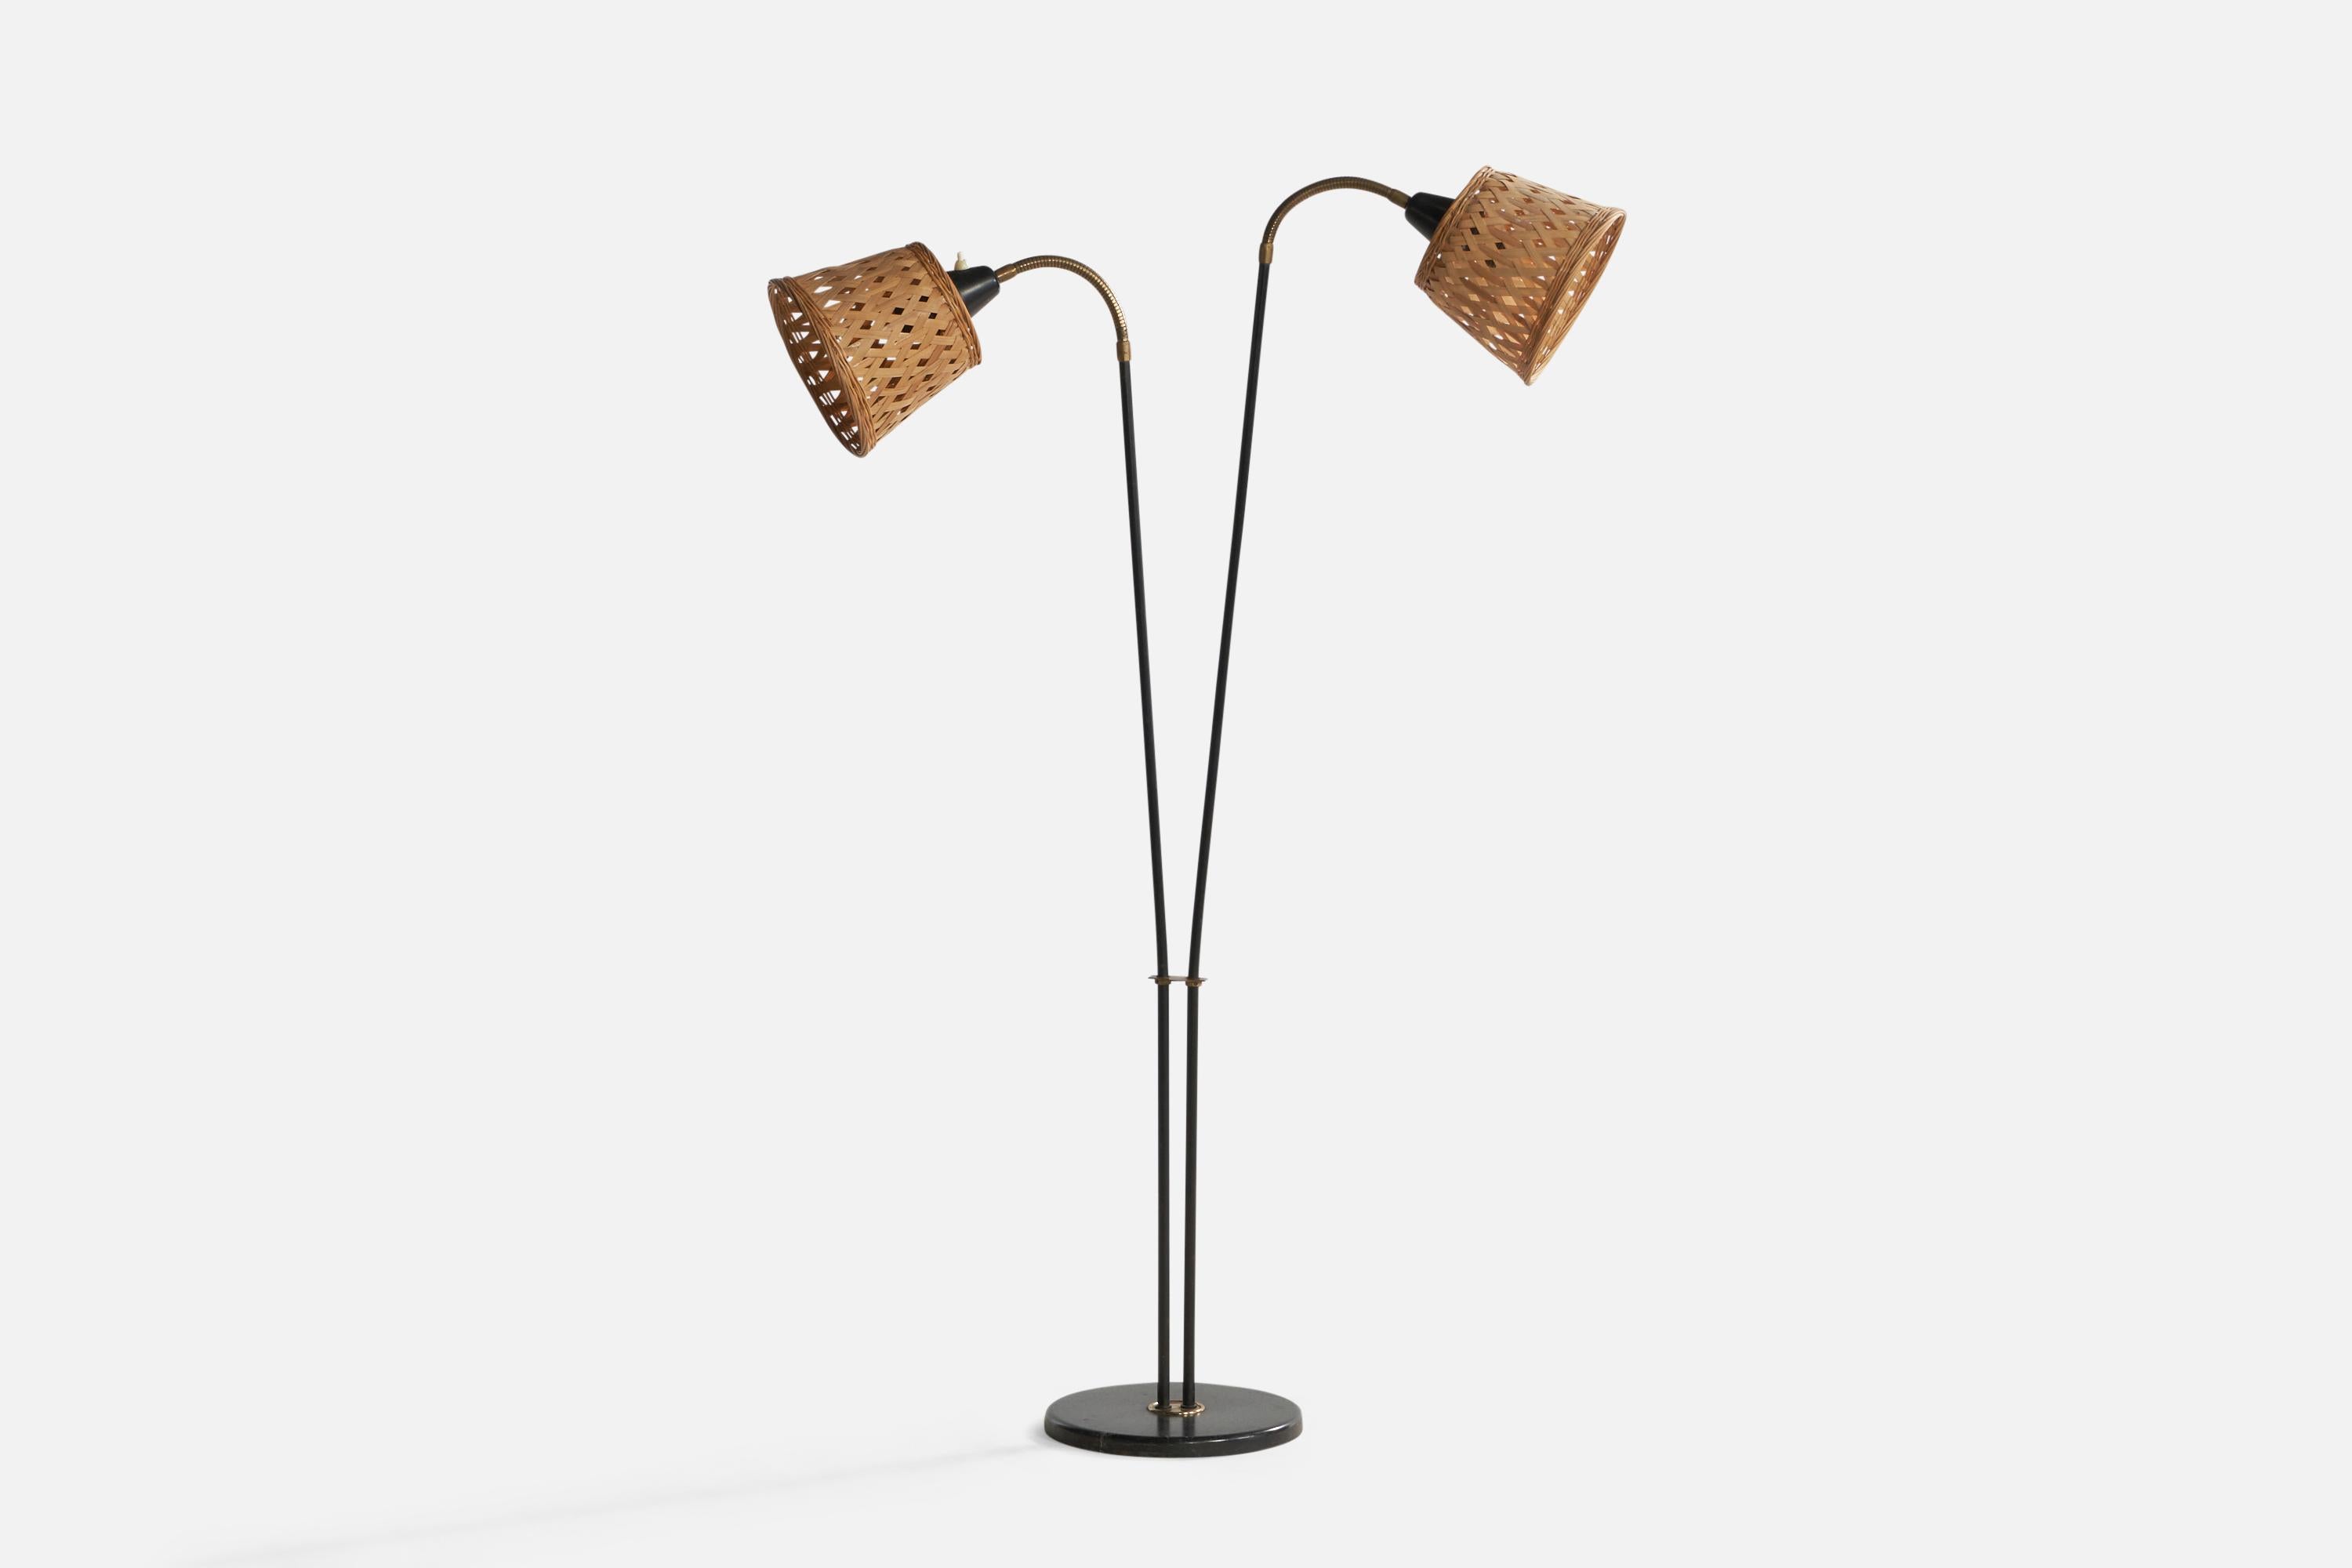 An adjustable two-armed brass, black-lacquered metal and rattan floor lamp designed and produced in Sweden, 1950s.

Overall Dimensions (inches): 60.5” H x 32” W x 10.3” Depth. Stated dimensions include shades.
Dimensions vary based on position of